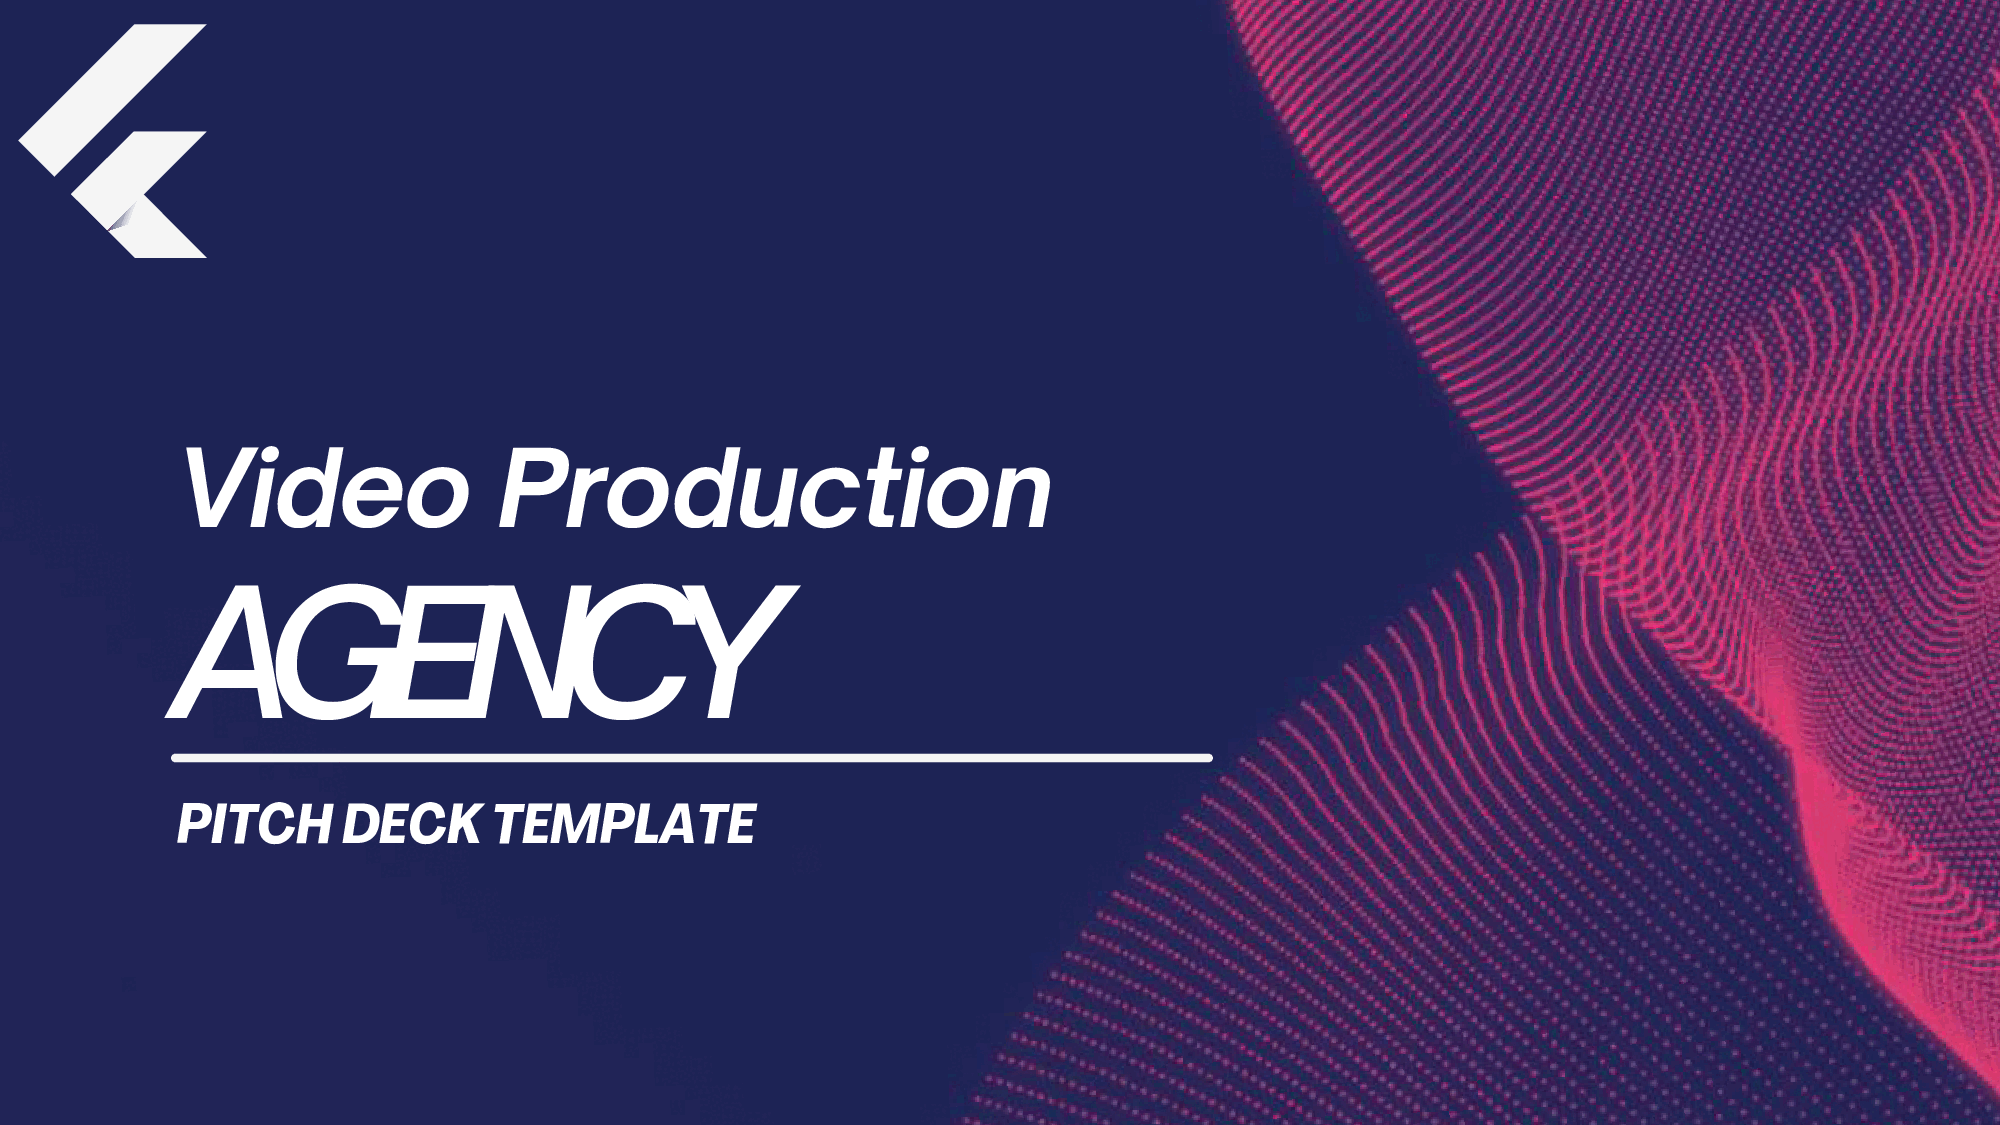 Video Production Agency Pitch Deck Template